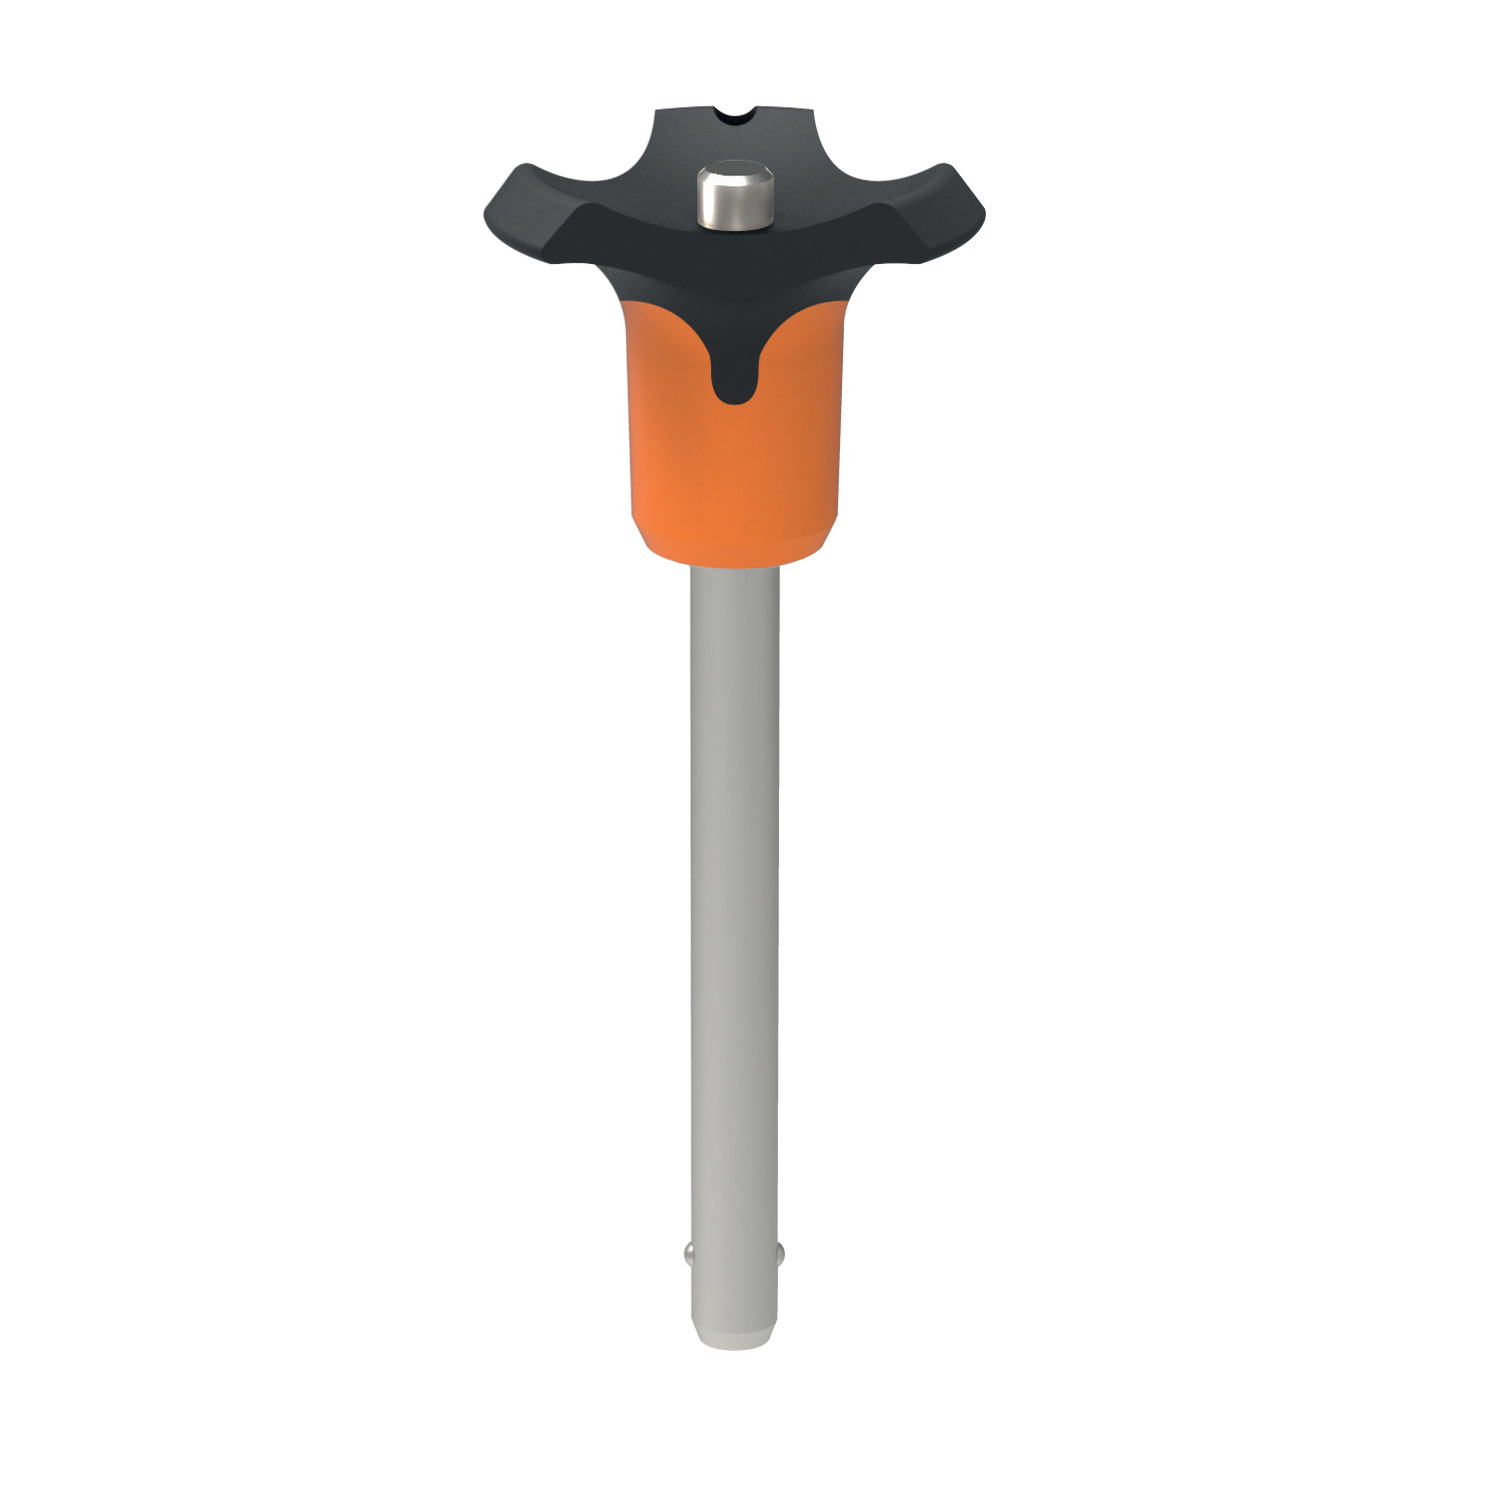 Ball Lock Pins - Single Acting - Orange Plastic Handle Single Acting Plastic Handle Ball Lock Pins in four different colours (orange, blue, grey and black) to co-ordinate with your required application colour scheme. For repeated connection of parts, with high sheer forces.